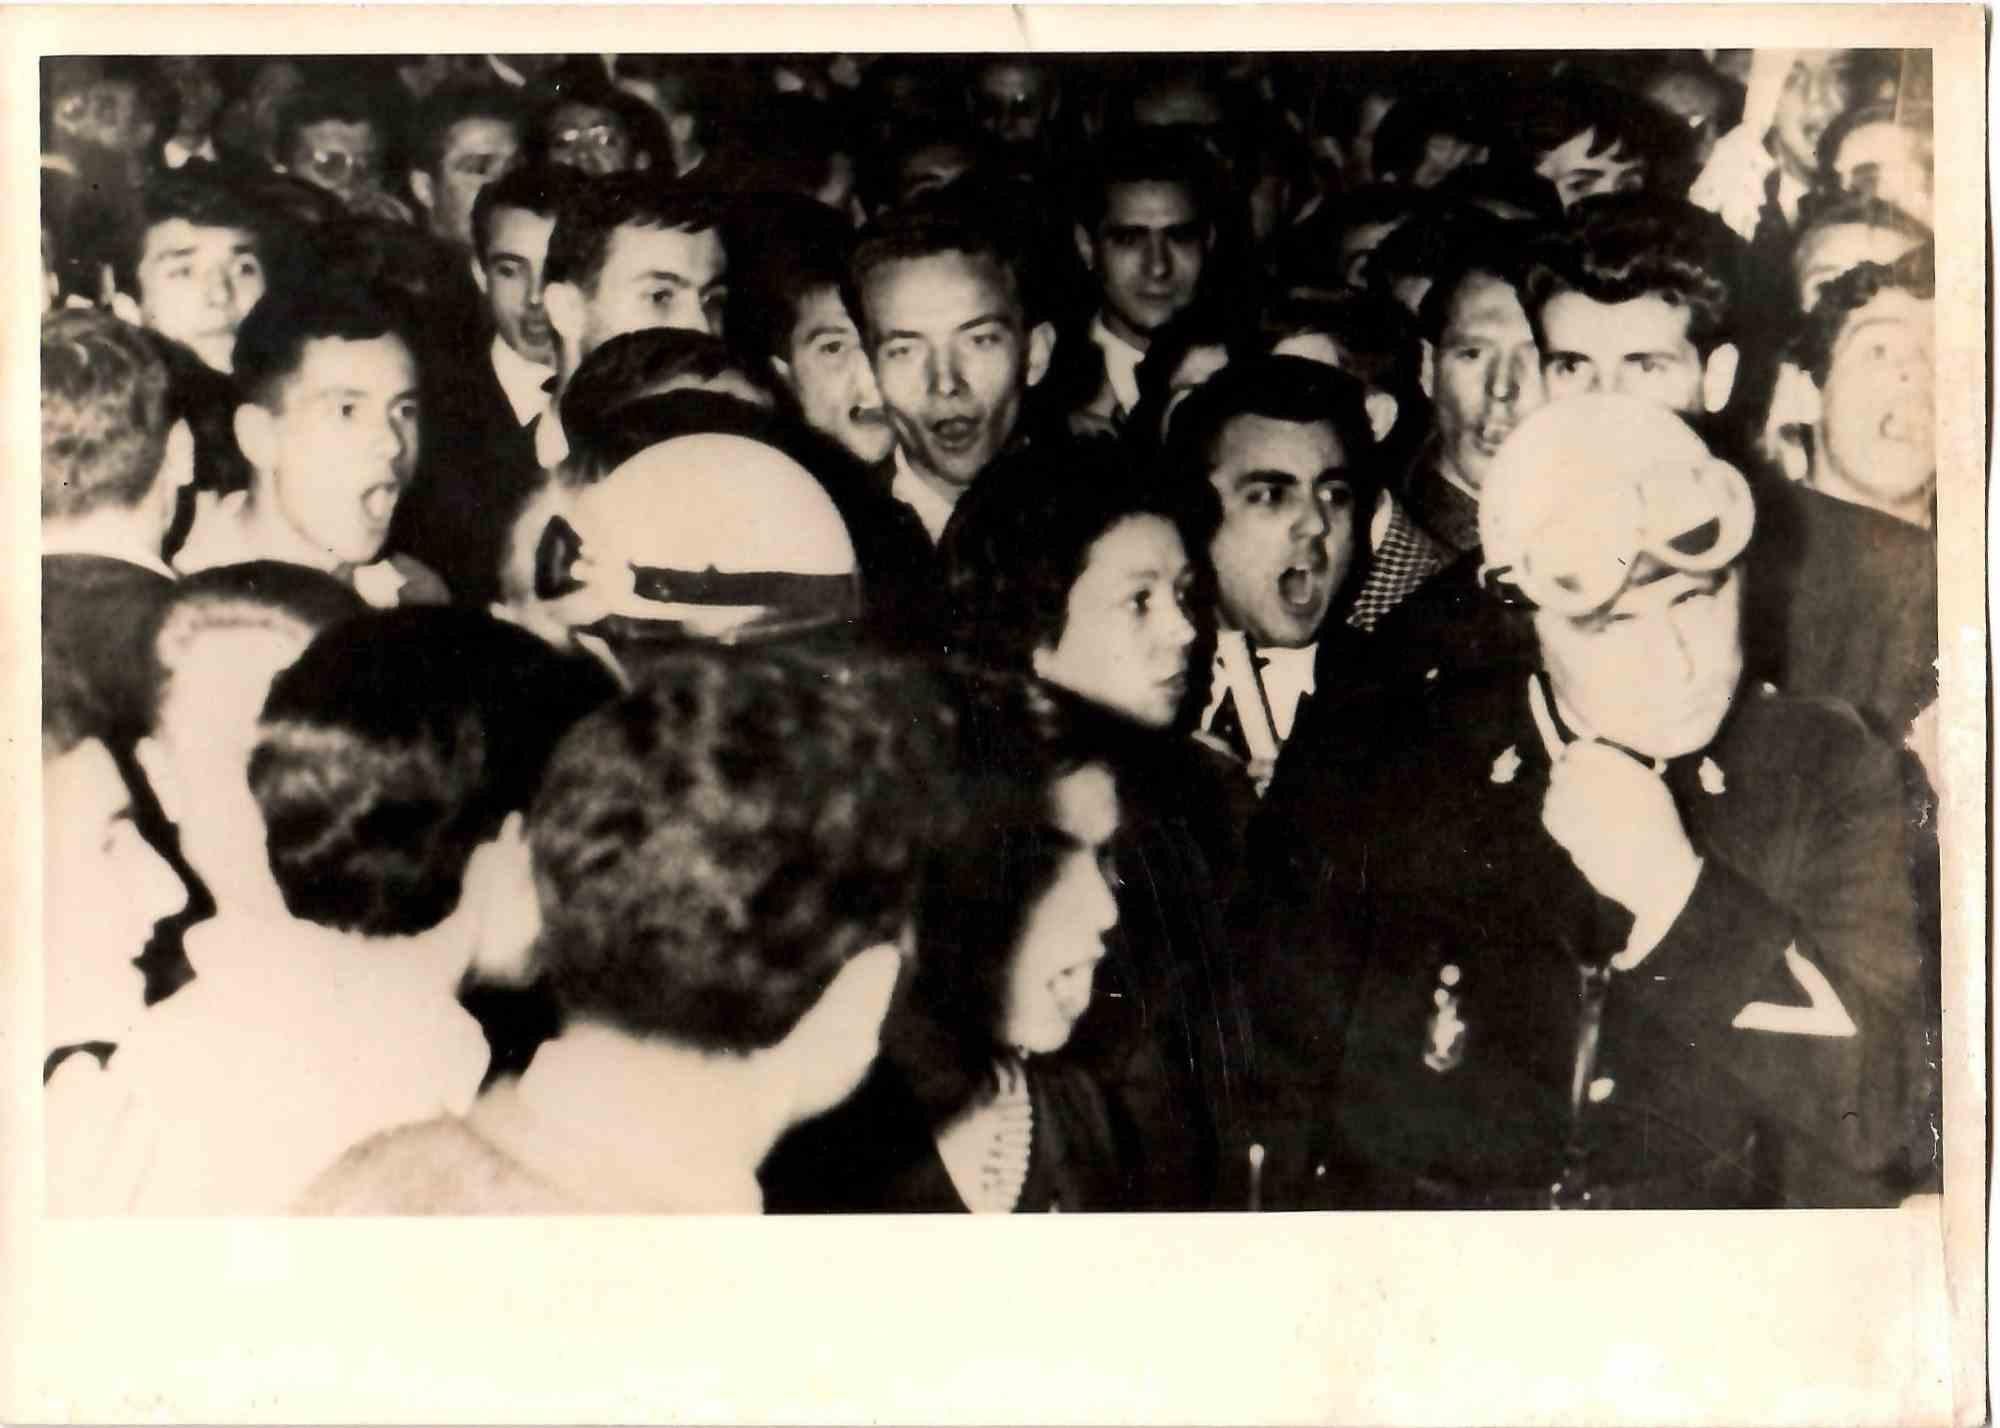 The Crowd Behind the Policemen, Algeria - Vintage Photograph - Mid-20th Century